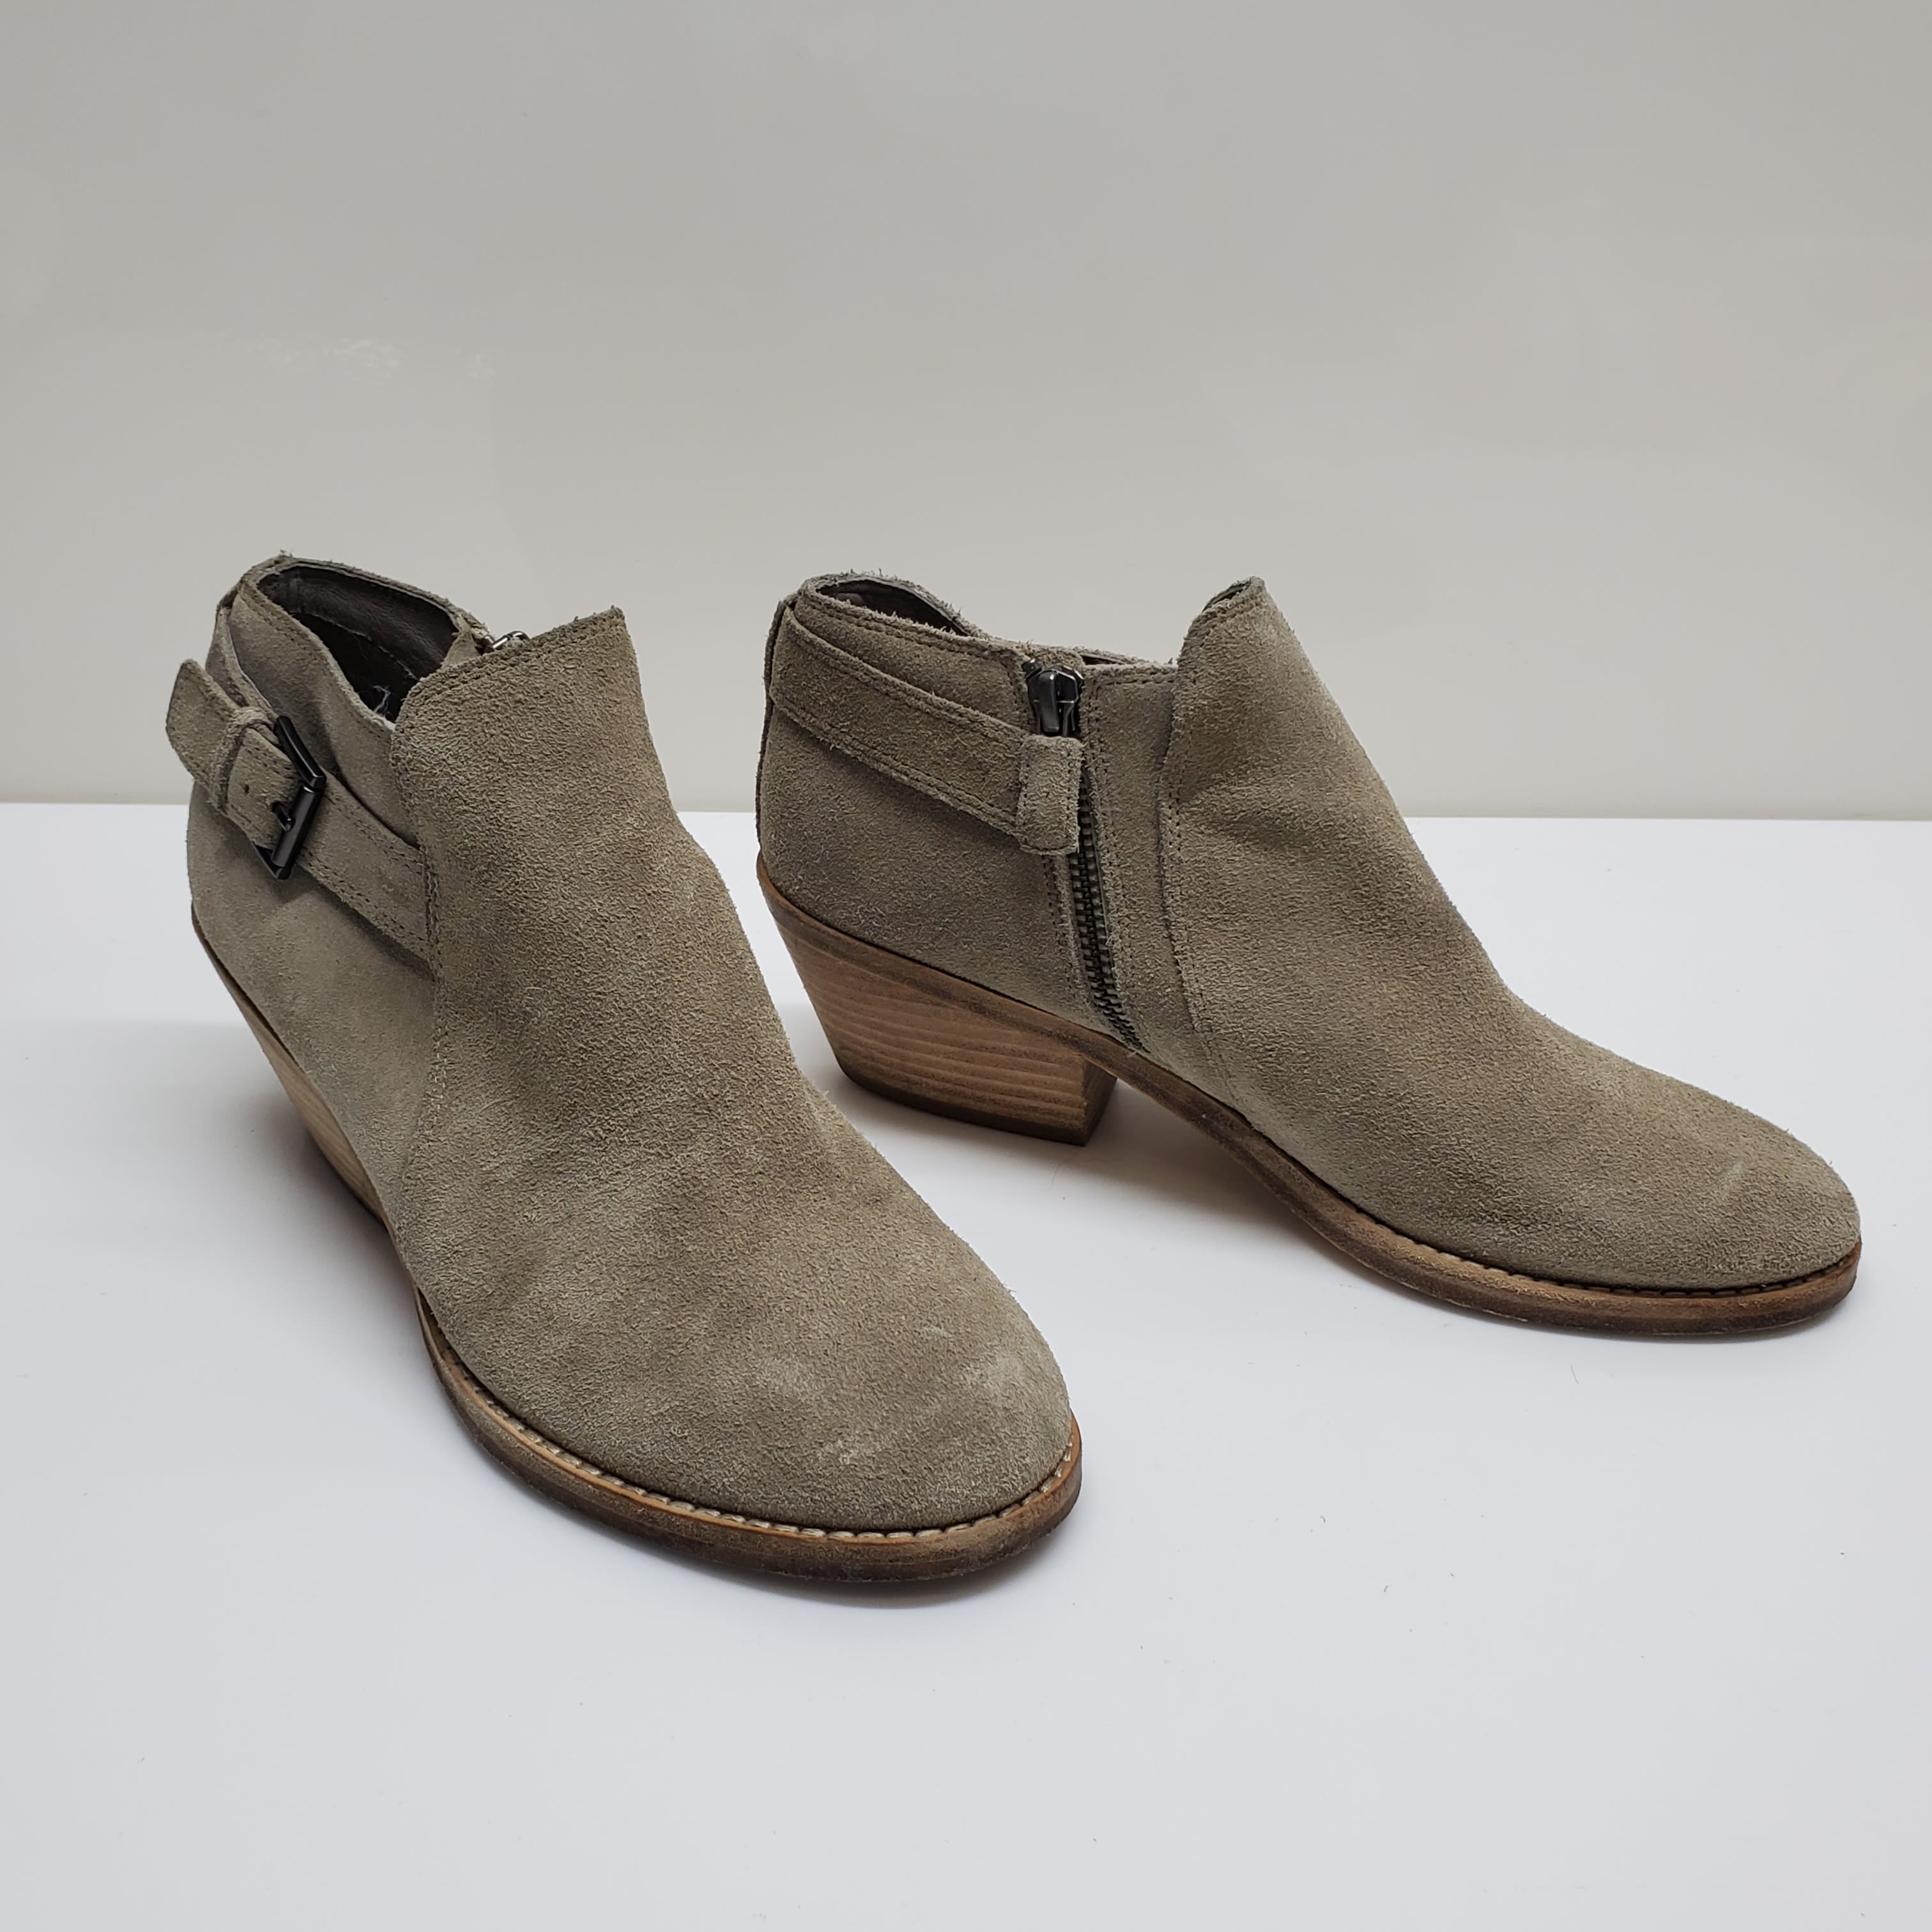 Buy the Eileen Fisher 7 Suede Rein Ankle Bootie Boot | GoodwillFinds